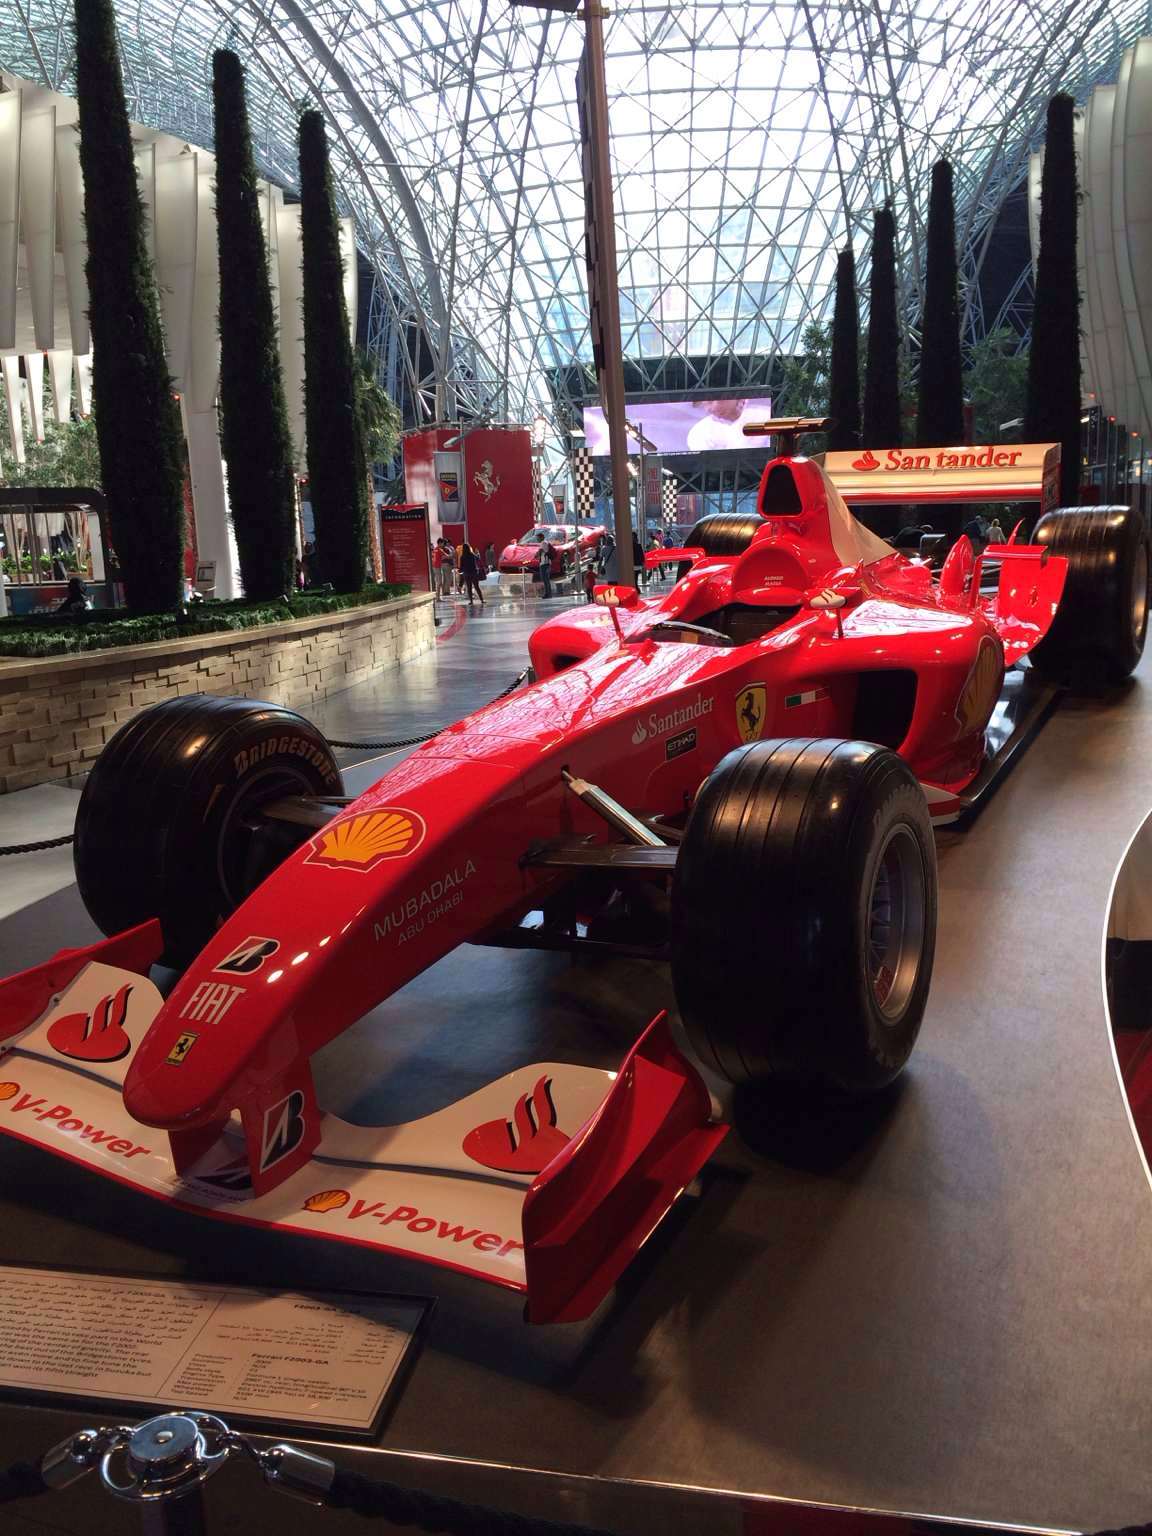 Ferrari World Abu Dhabi. Compare Ticket Prices from Different Websites